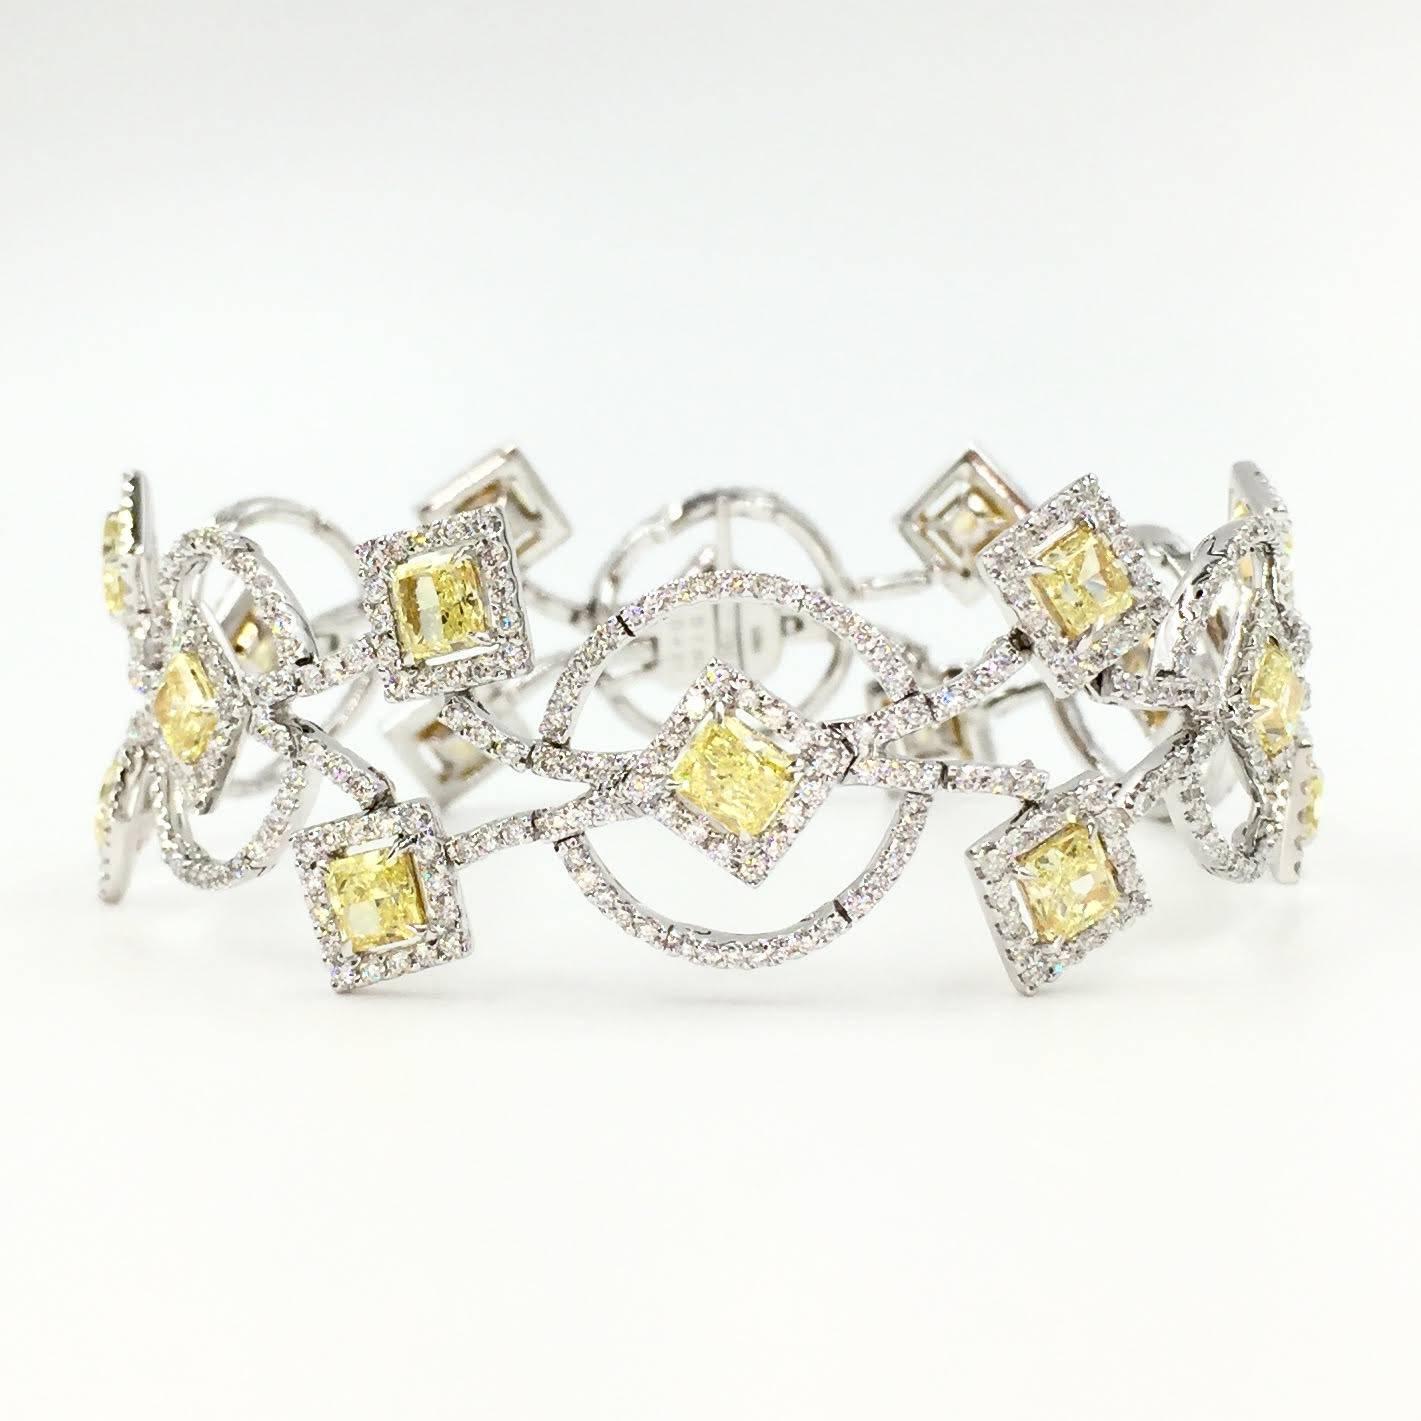 White and Yellow Diamond Art Deco Inspired Bracelet 12.17 Carat In New Condition For Sale In Pikesville, MD